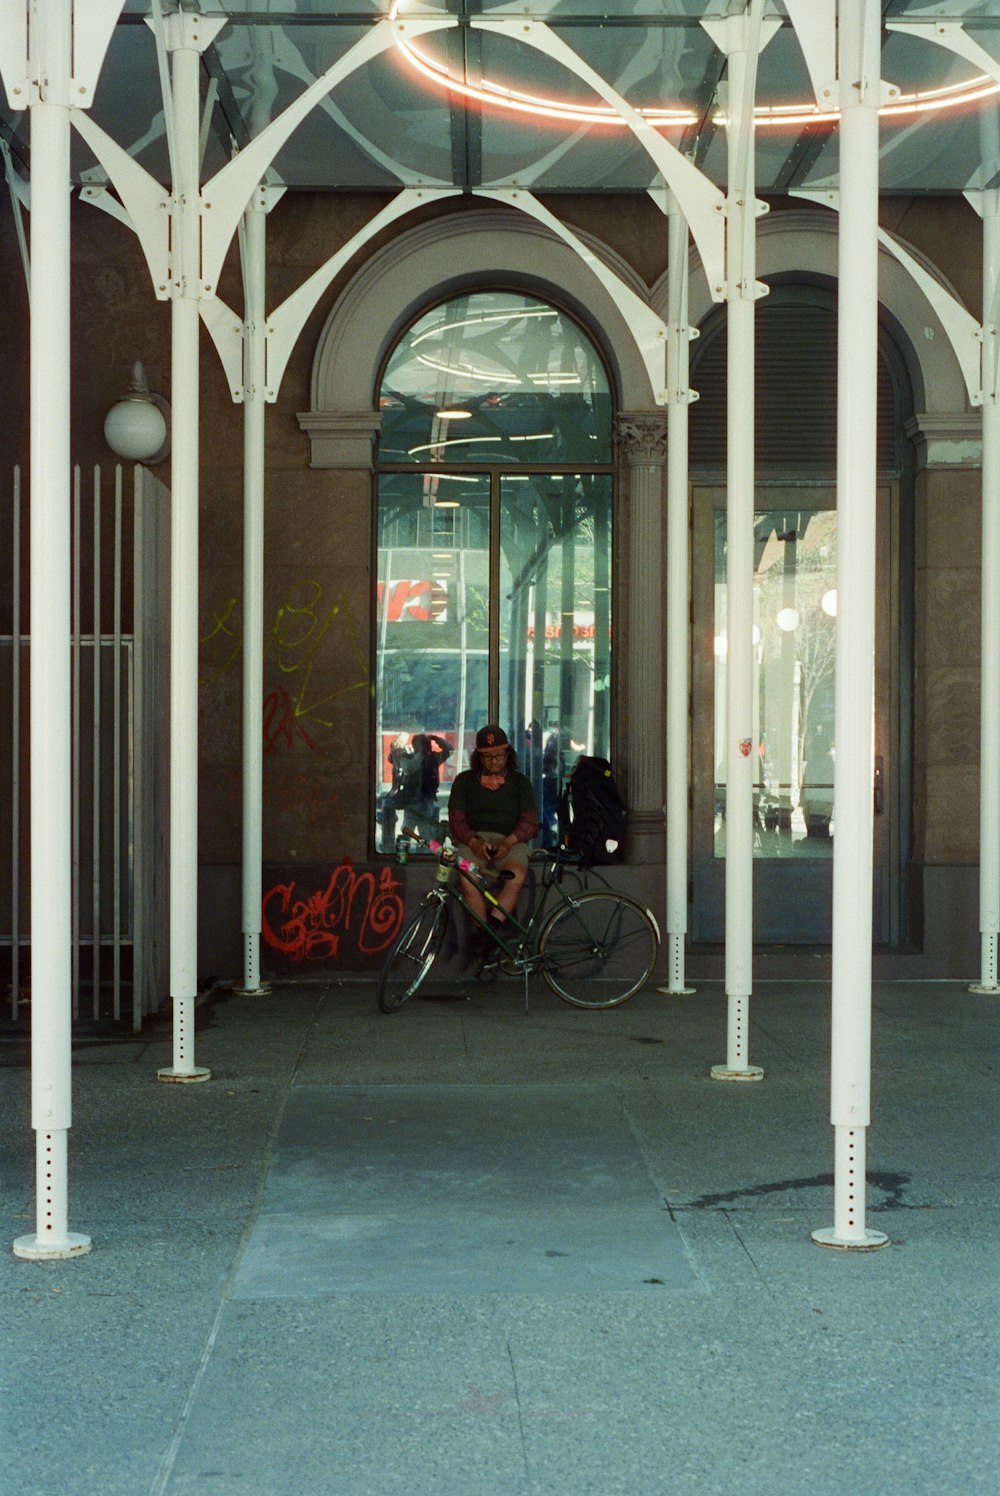 a person on a bike in a building